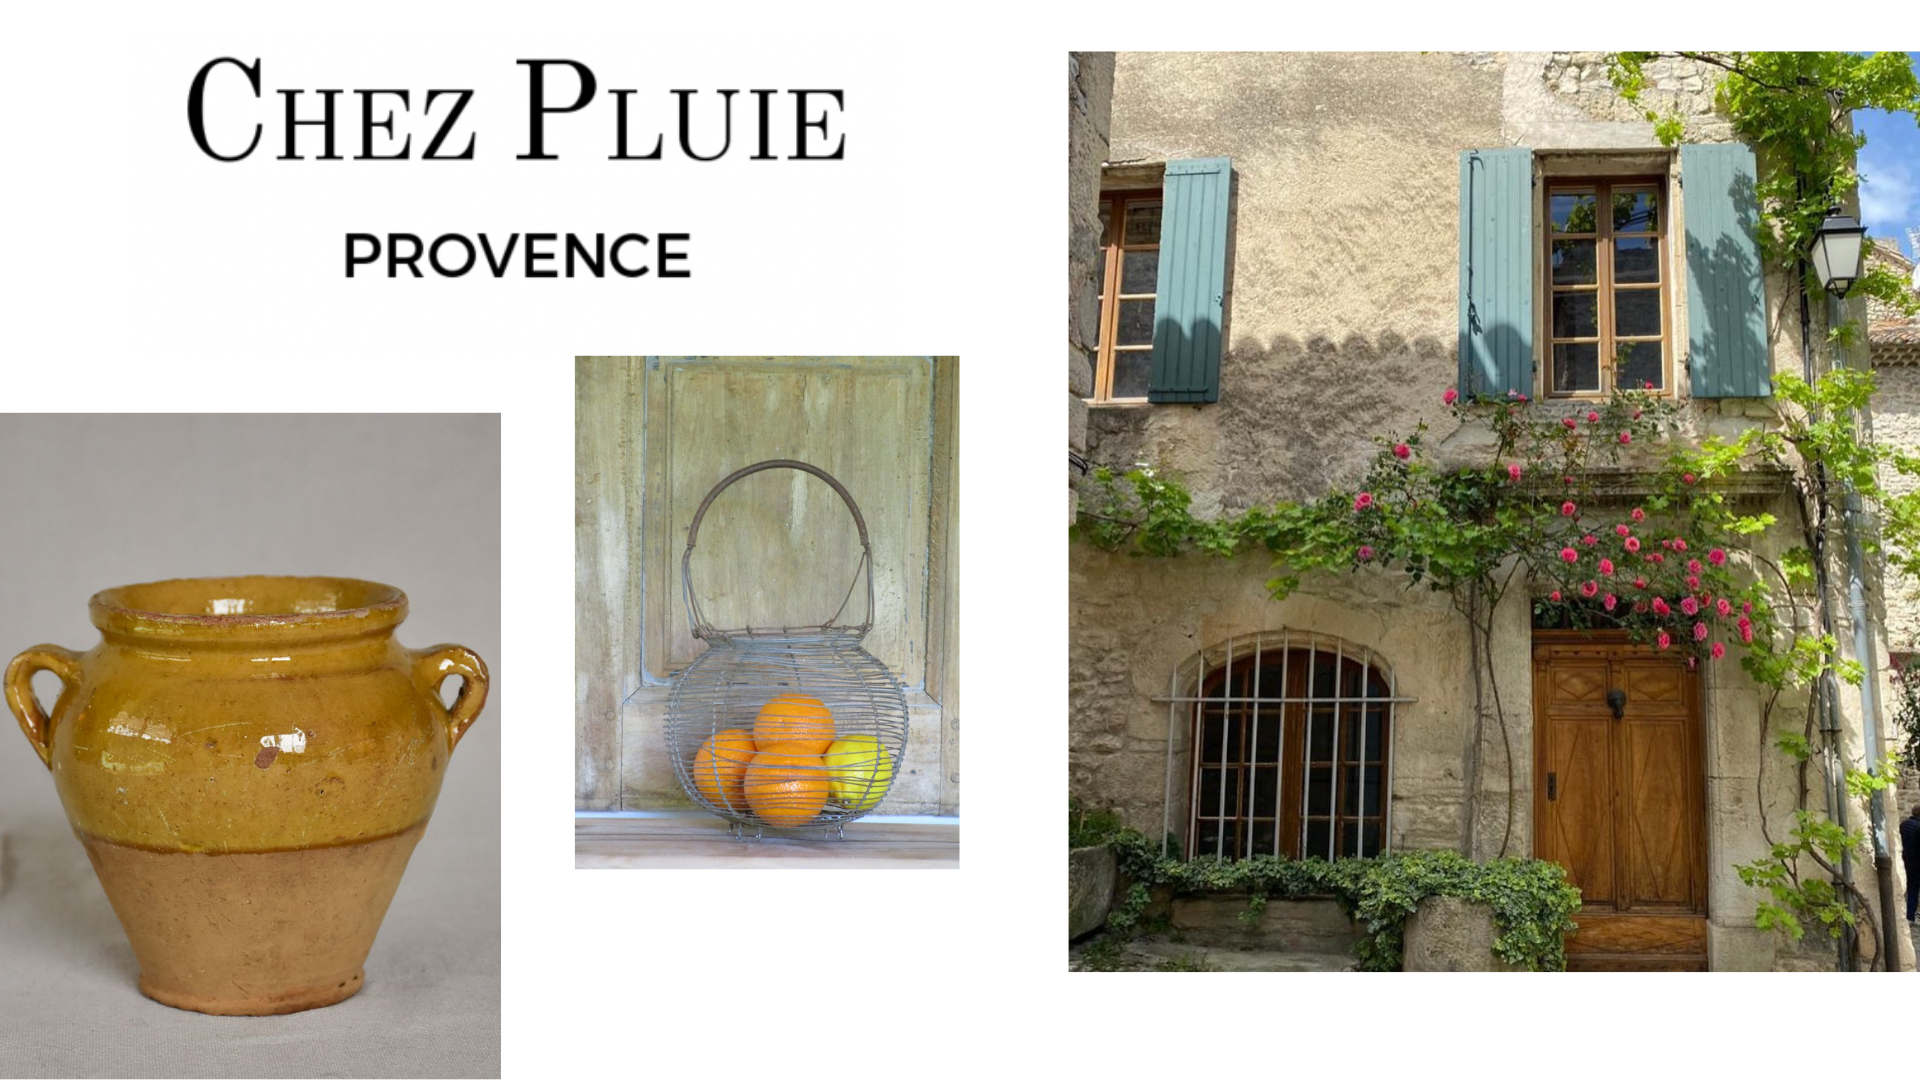 2nd Giveaway: A Chez Pluie Treasure from Provence